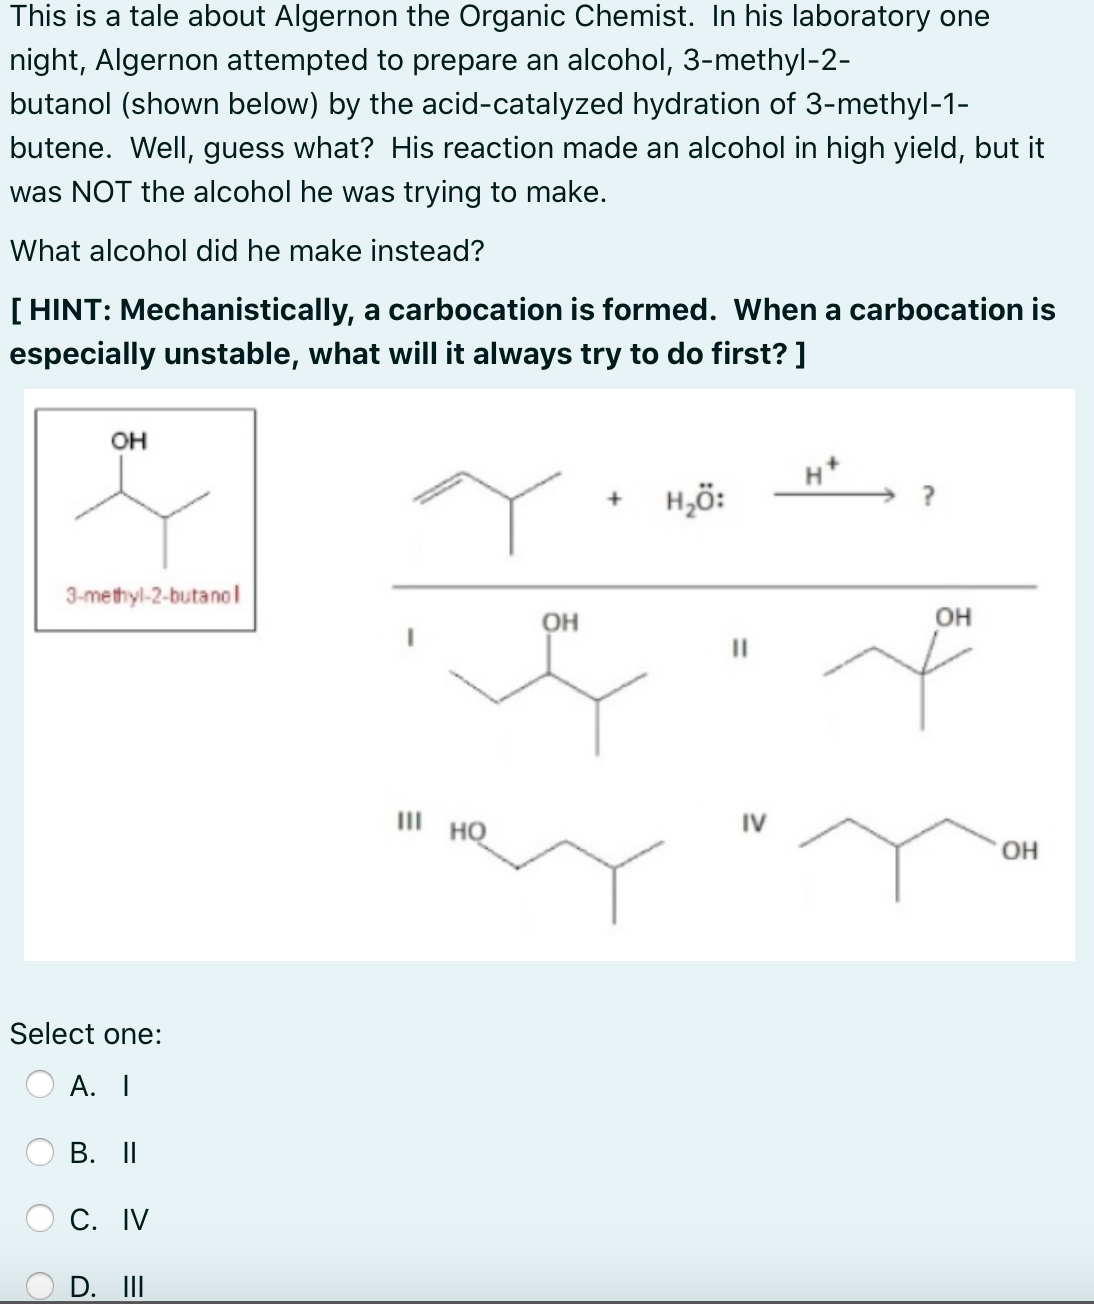 This is a tale about Algernon the Organic Chemist. In his laboratory one
night, Algernon attempted to prepare an alcohol, 3-methyl-2-
butanol (shown below) by the acid-catalyzed hydration of 3-methyl-1-
butene. Well, guess what? His reaction made an alcohol in high yield, but it
was NOT the alcohol he was trying to make.
What alcohol did he make instead?
[ HINT: Mechanistically, a carbocation is formed. When a carbocation is
especially unstable, what will it always try to do first? ]
он
H,ö:
3-methyl-2-butanol
он
OH
III HQ
IV
OH
Select one:
А. I
В. I
С. IV
D. II
